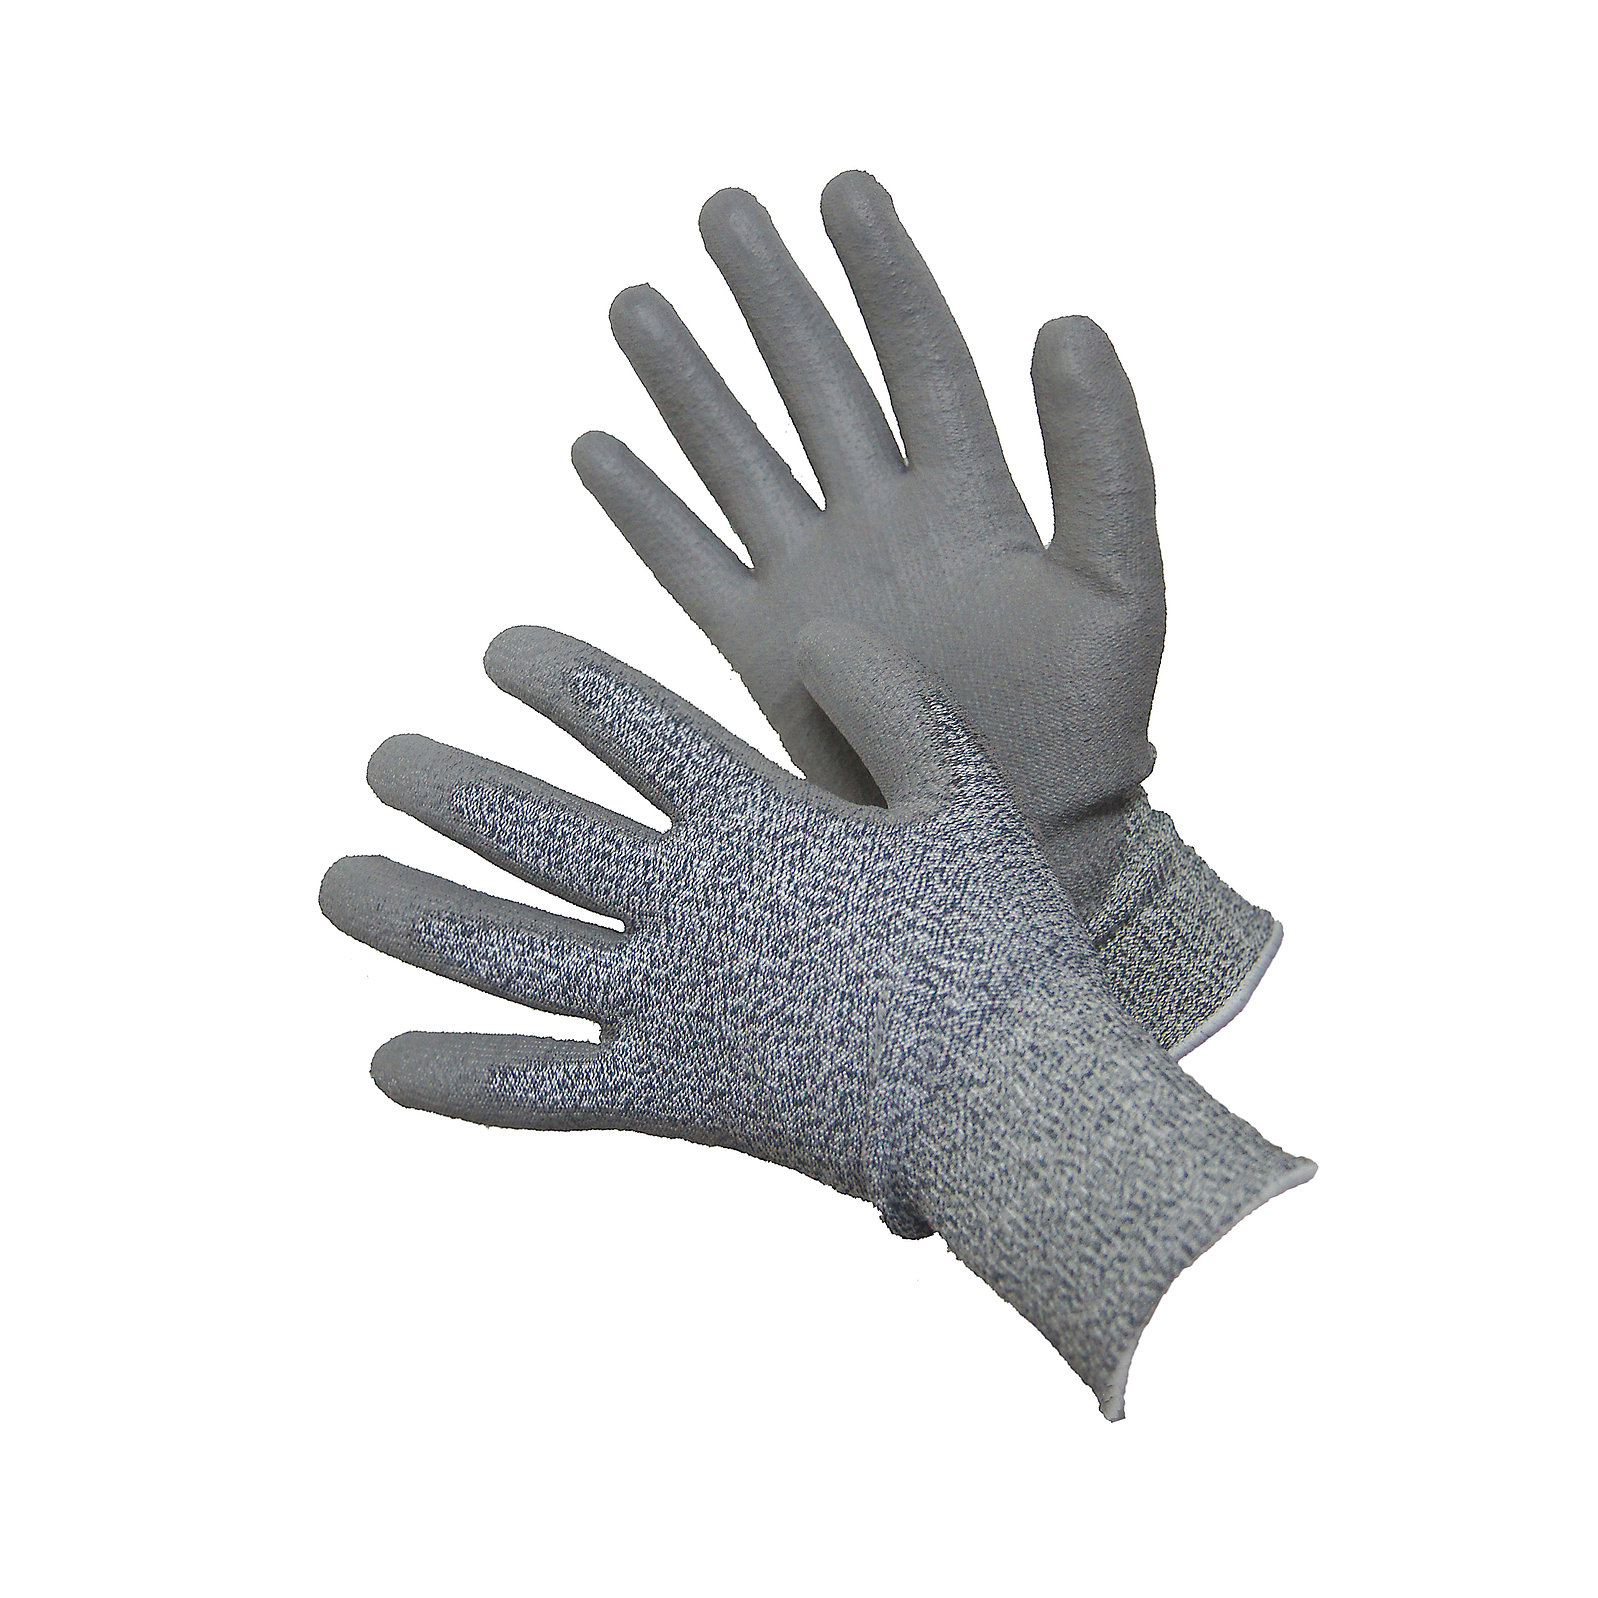 Cut 5 H-Power Shell with PU Palm Coated Gloves